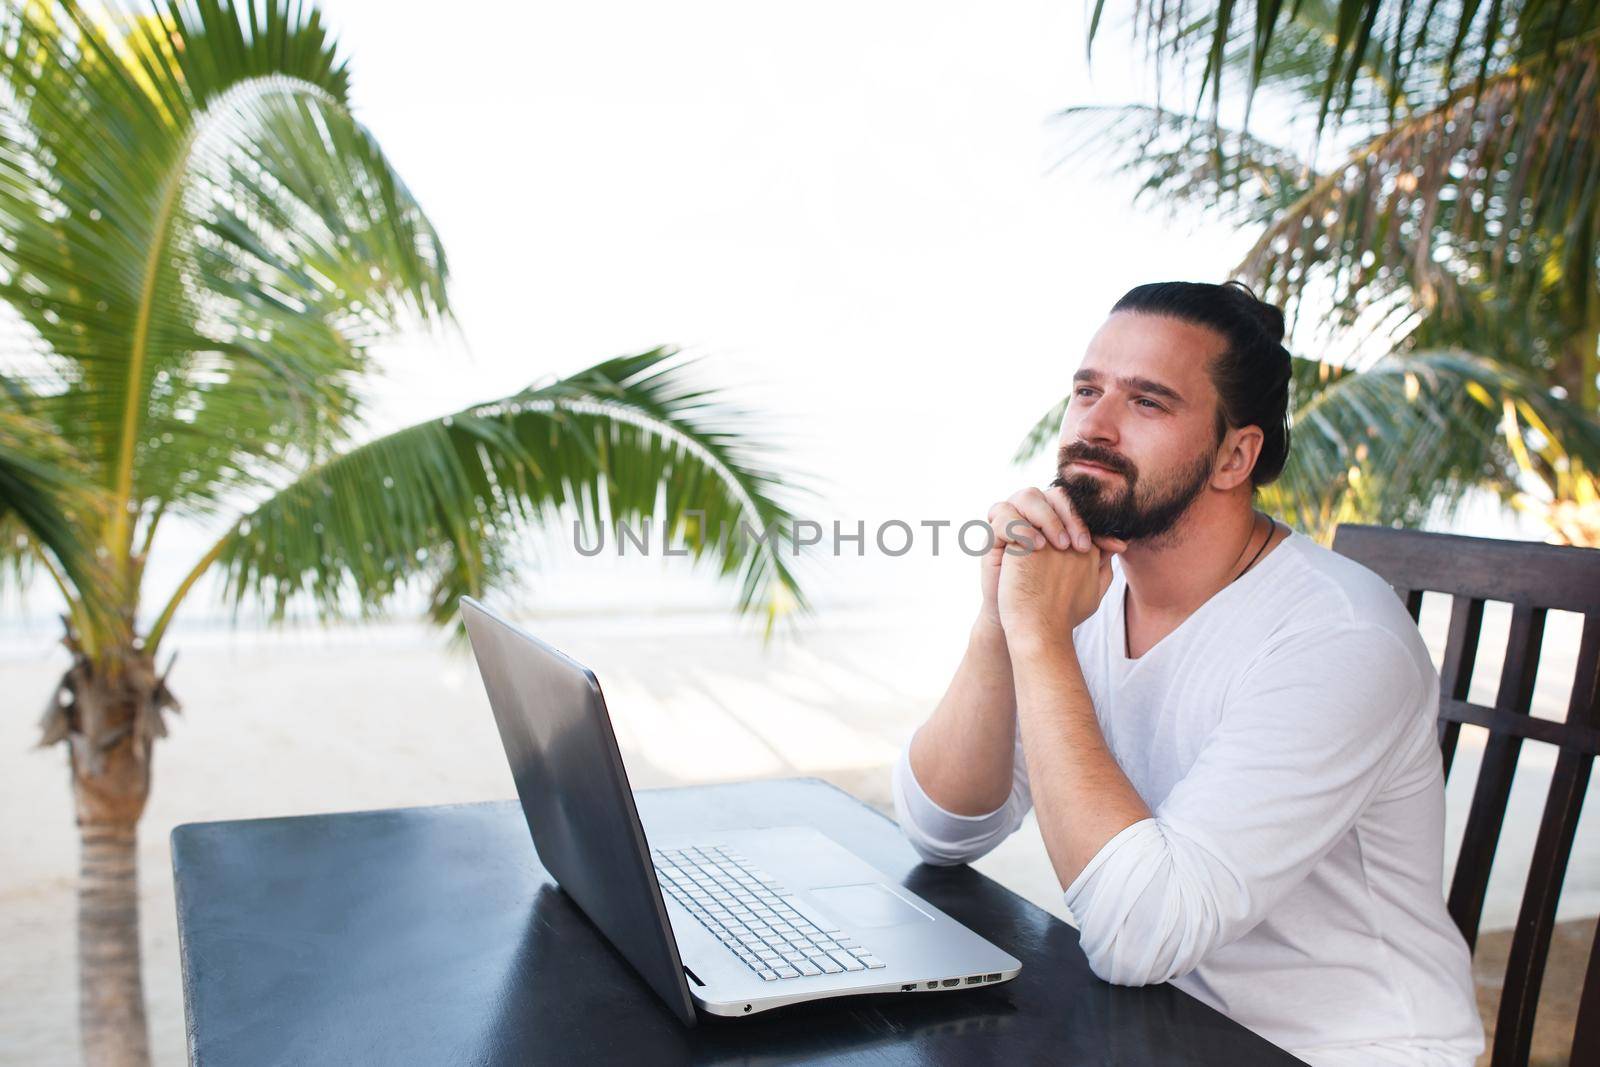 Man relaxing on the beach with laptop, freelancer workplace, dream job by Jyliana